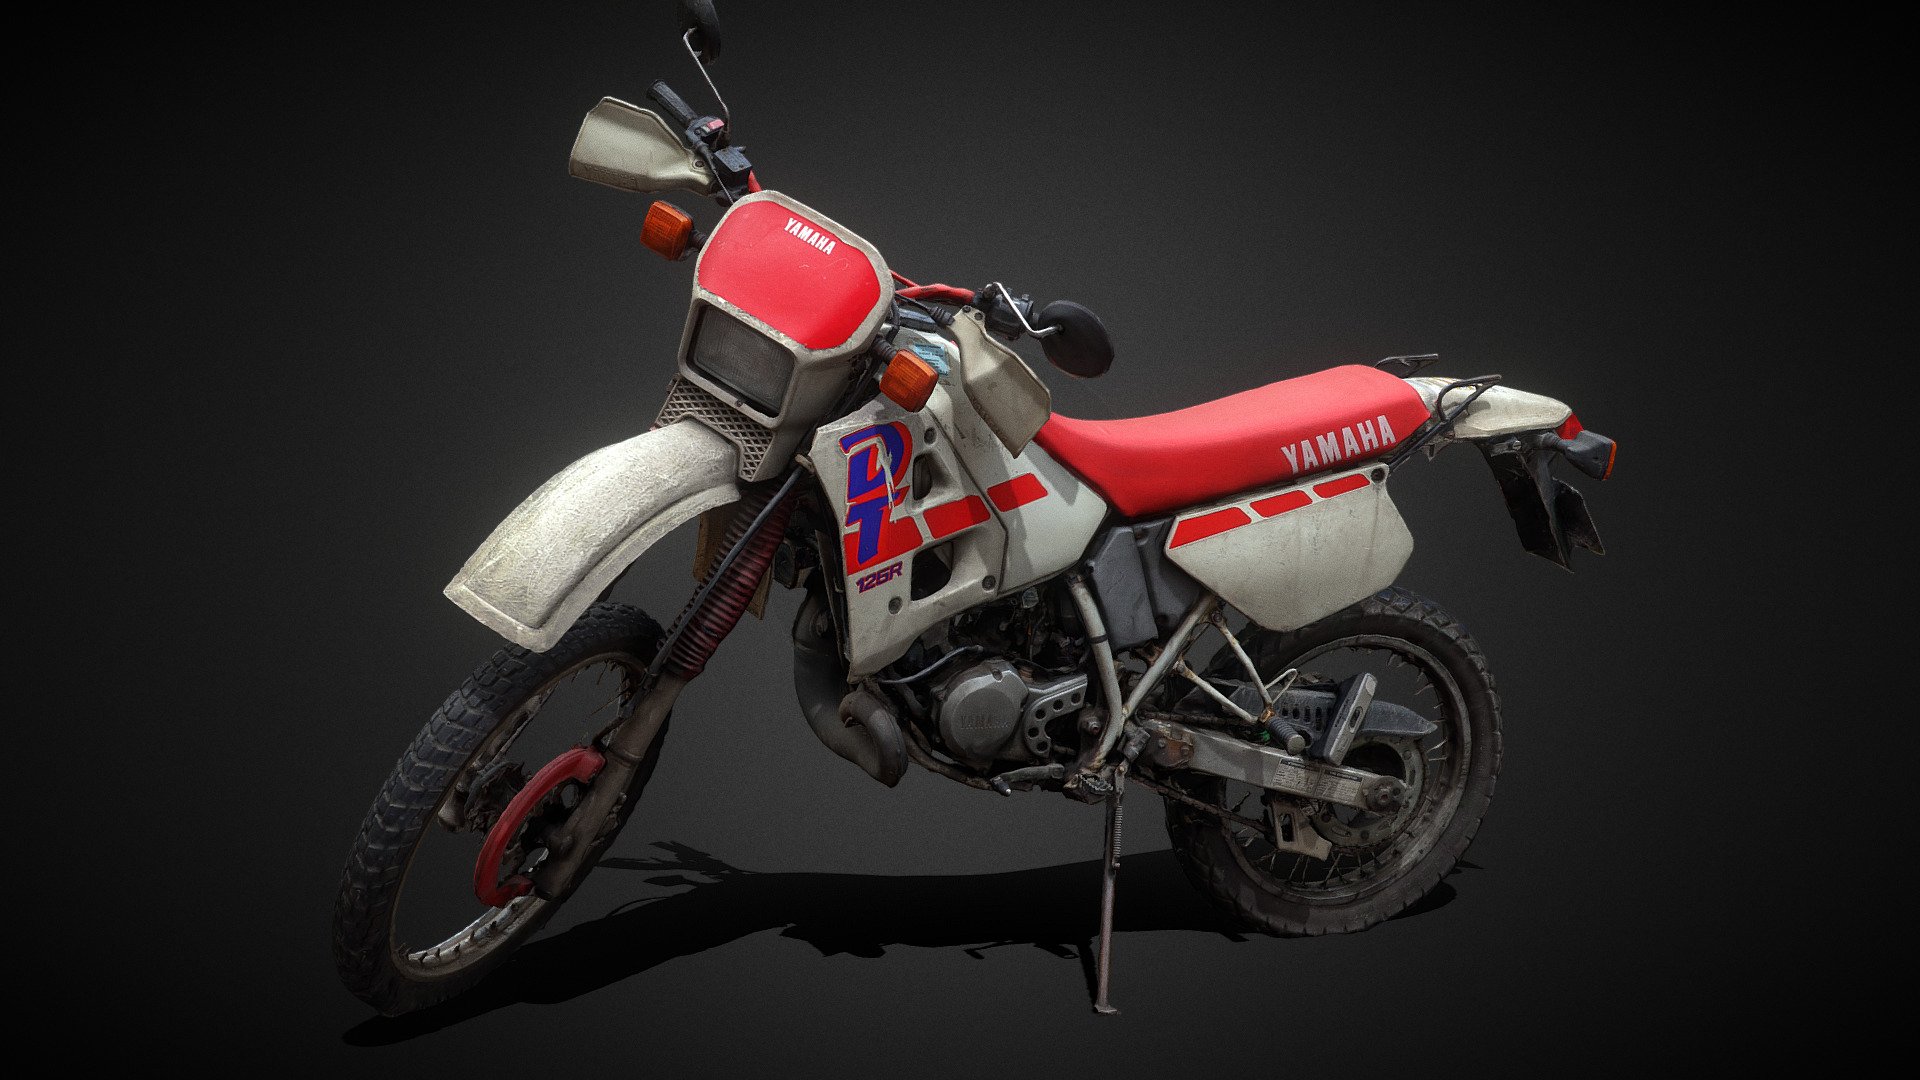 Photogrammetry scan of a Yamaha DT 125 R motorcross;
220 pics with 200D, processed with Reality Capture. 

From 80m to 200K model with 4K textures 3d model